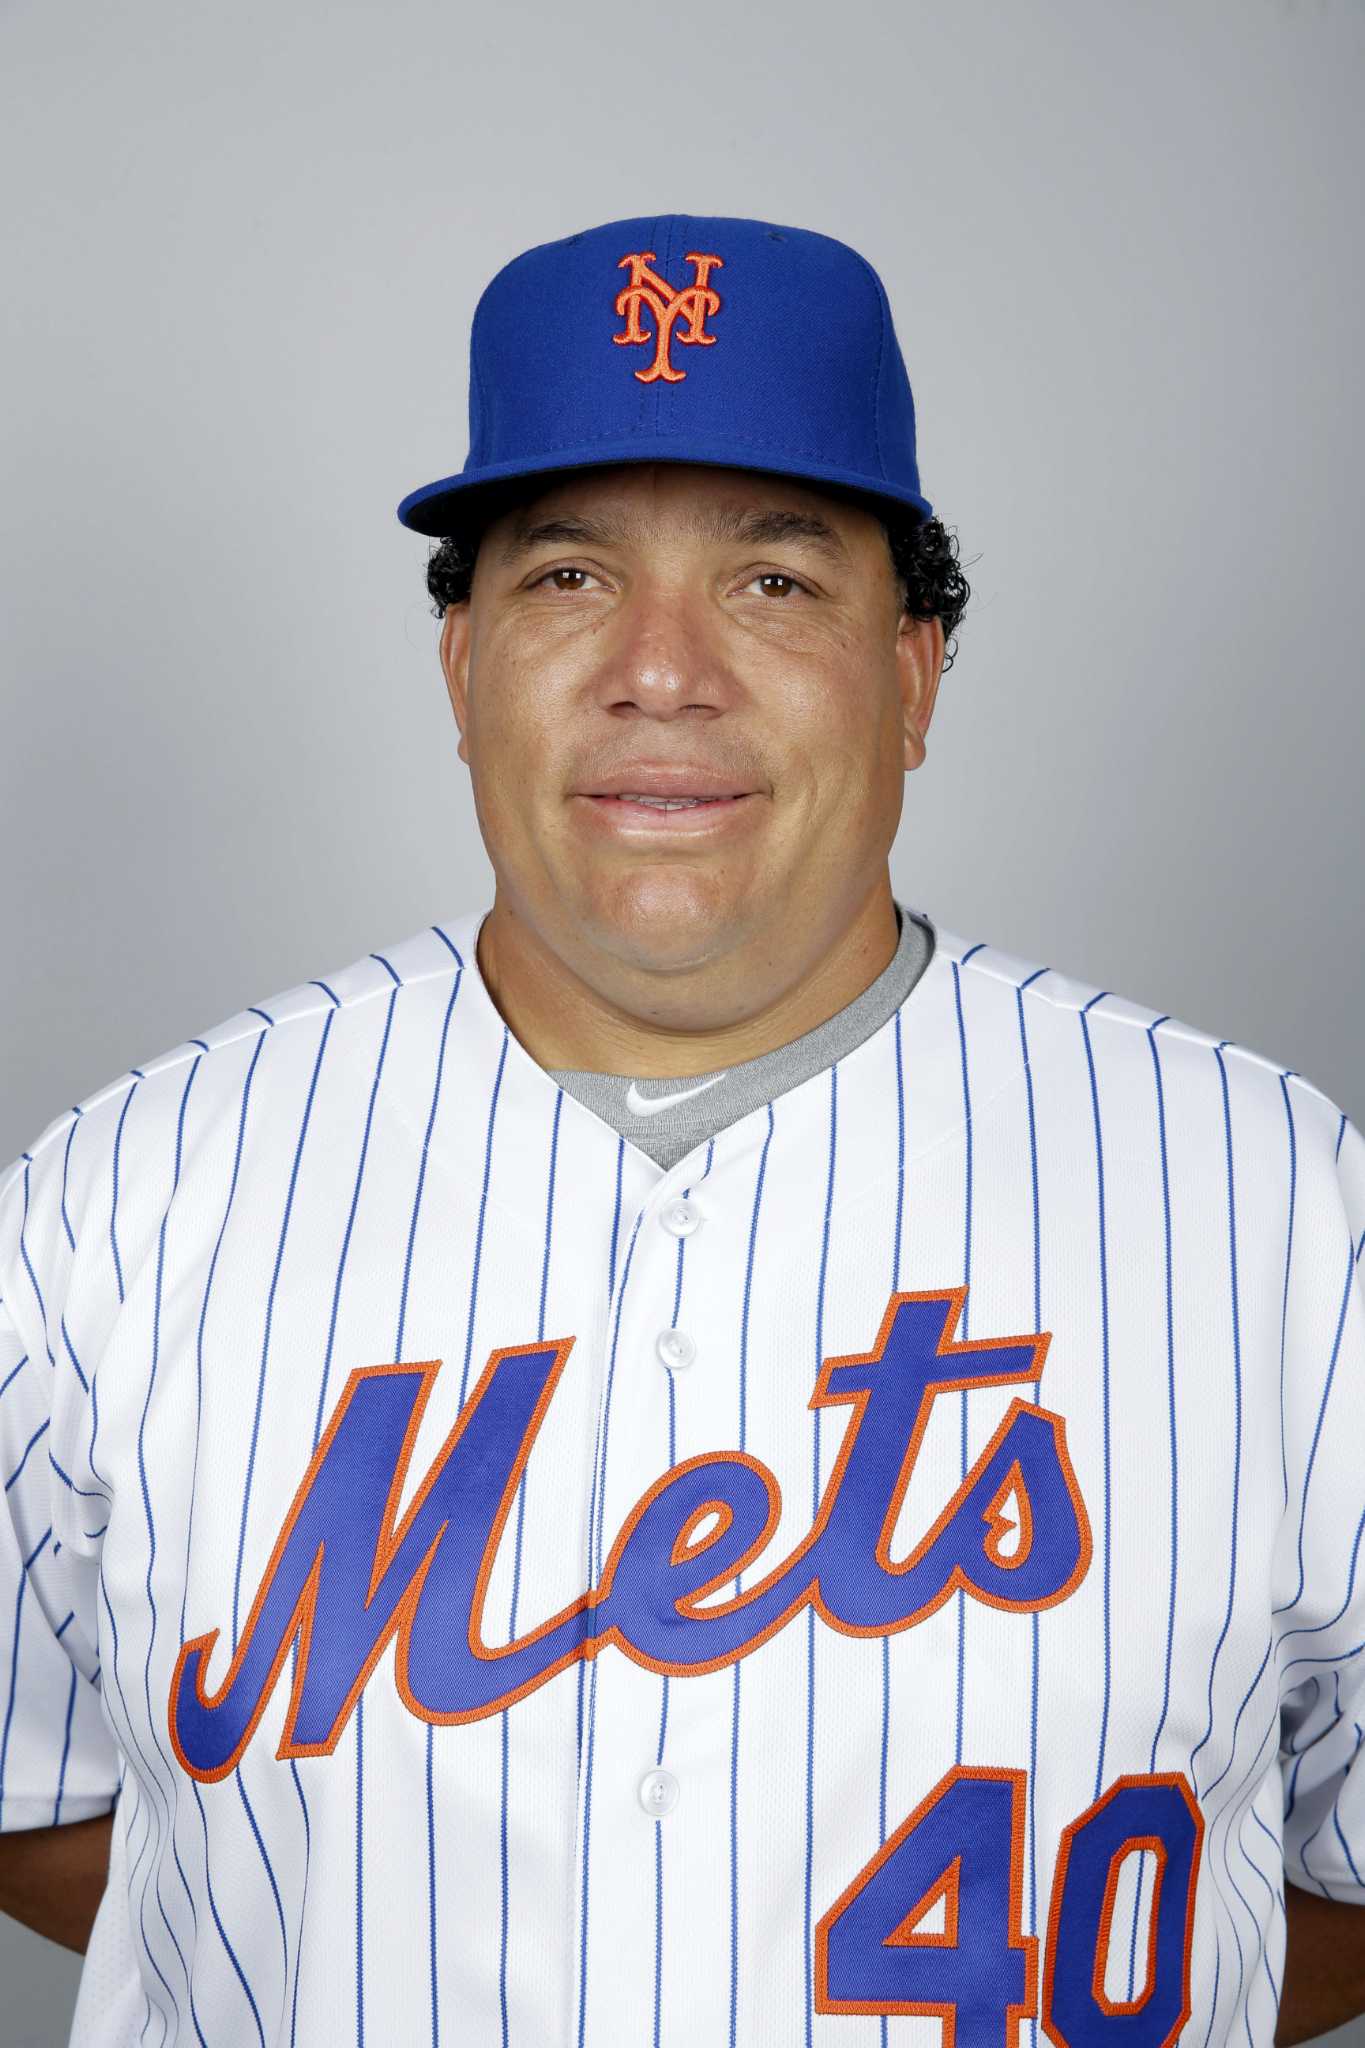 Former Mets pitcher Bartolo Colon isn't ready to retire yet